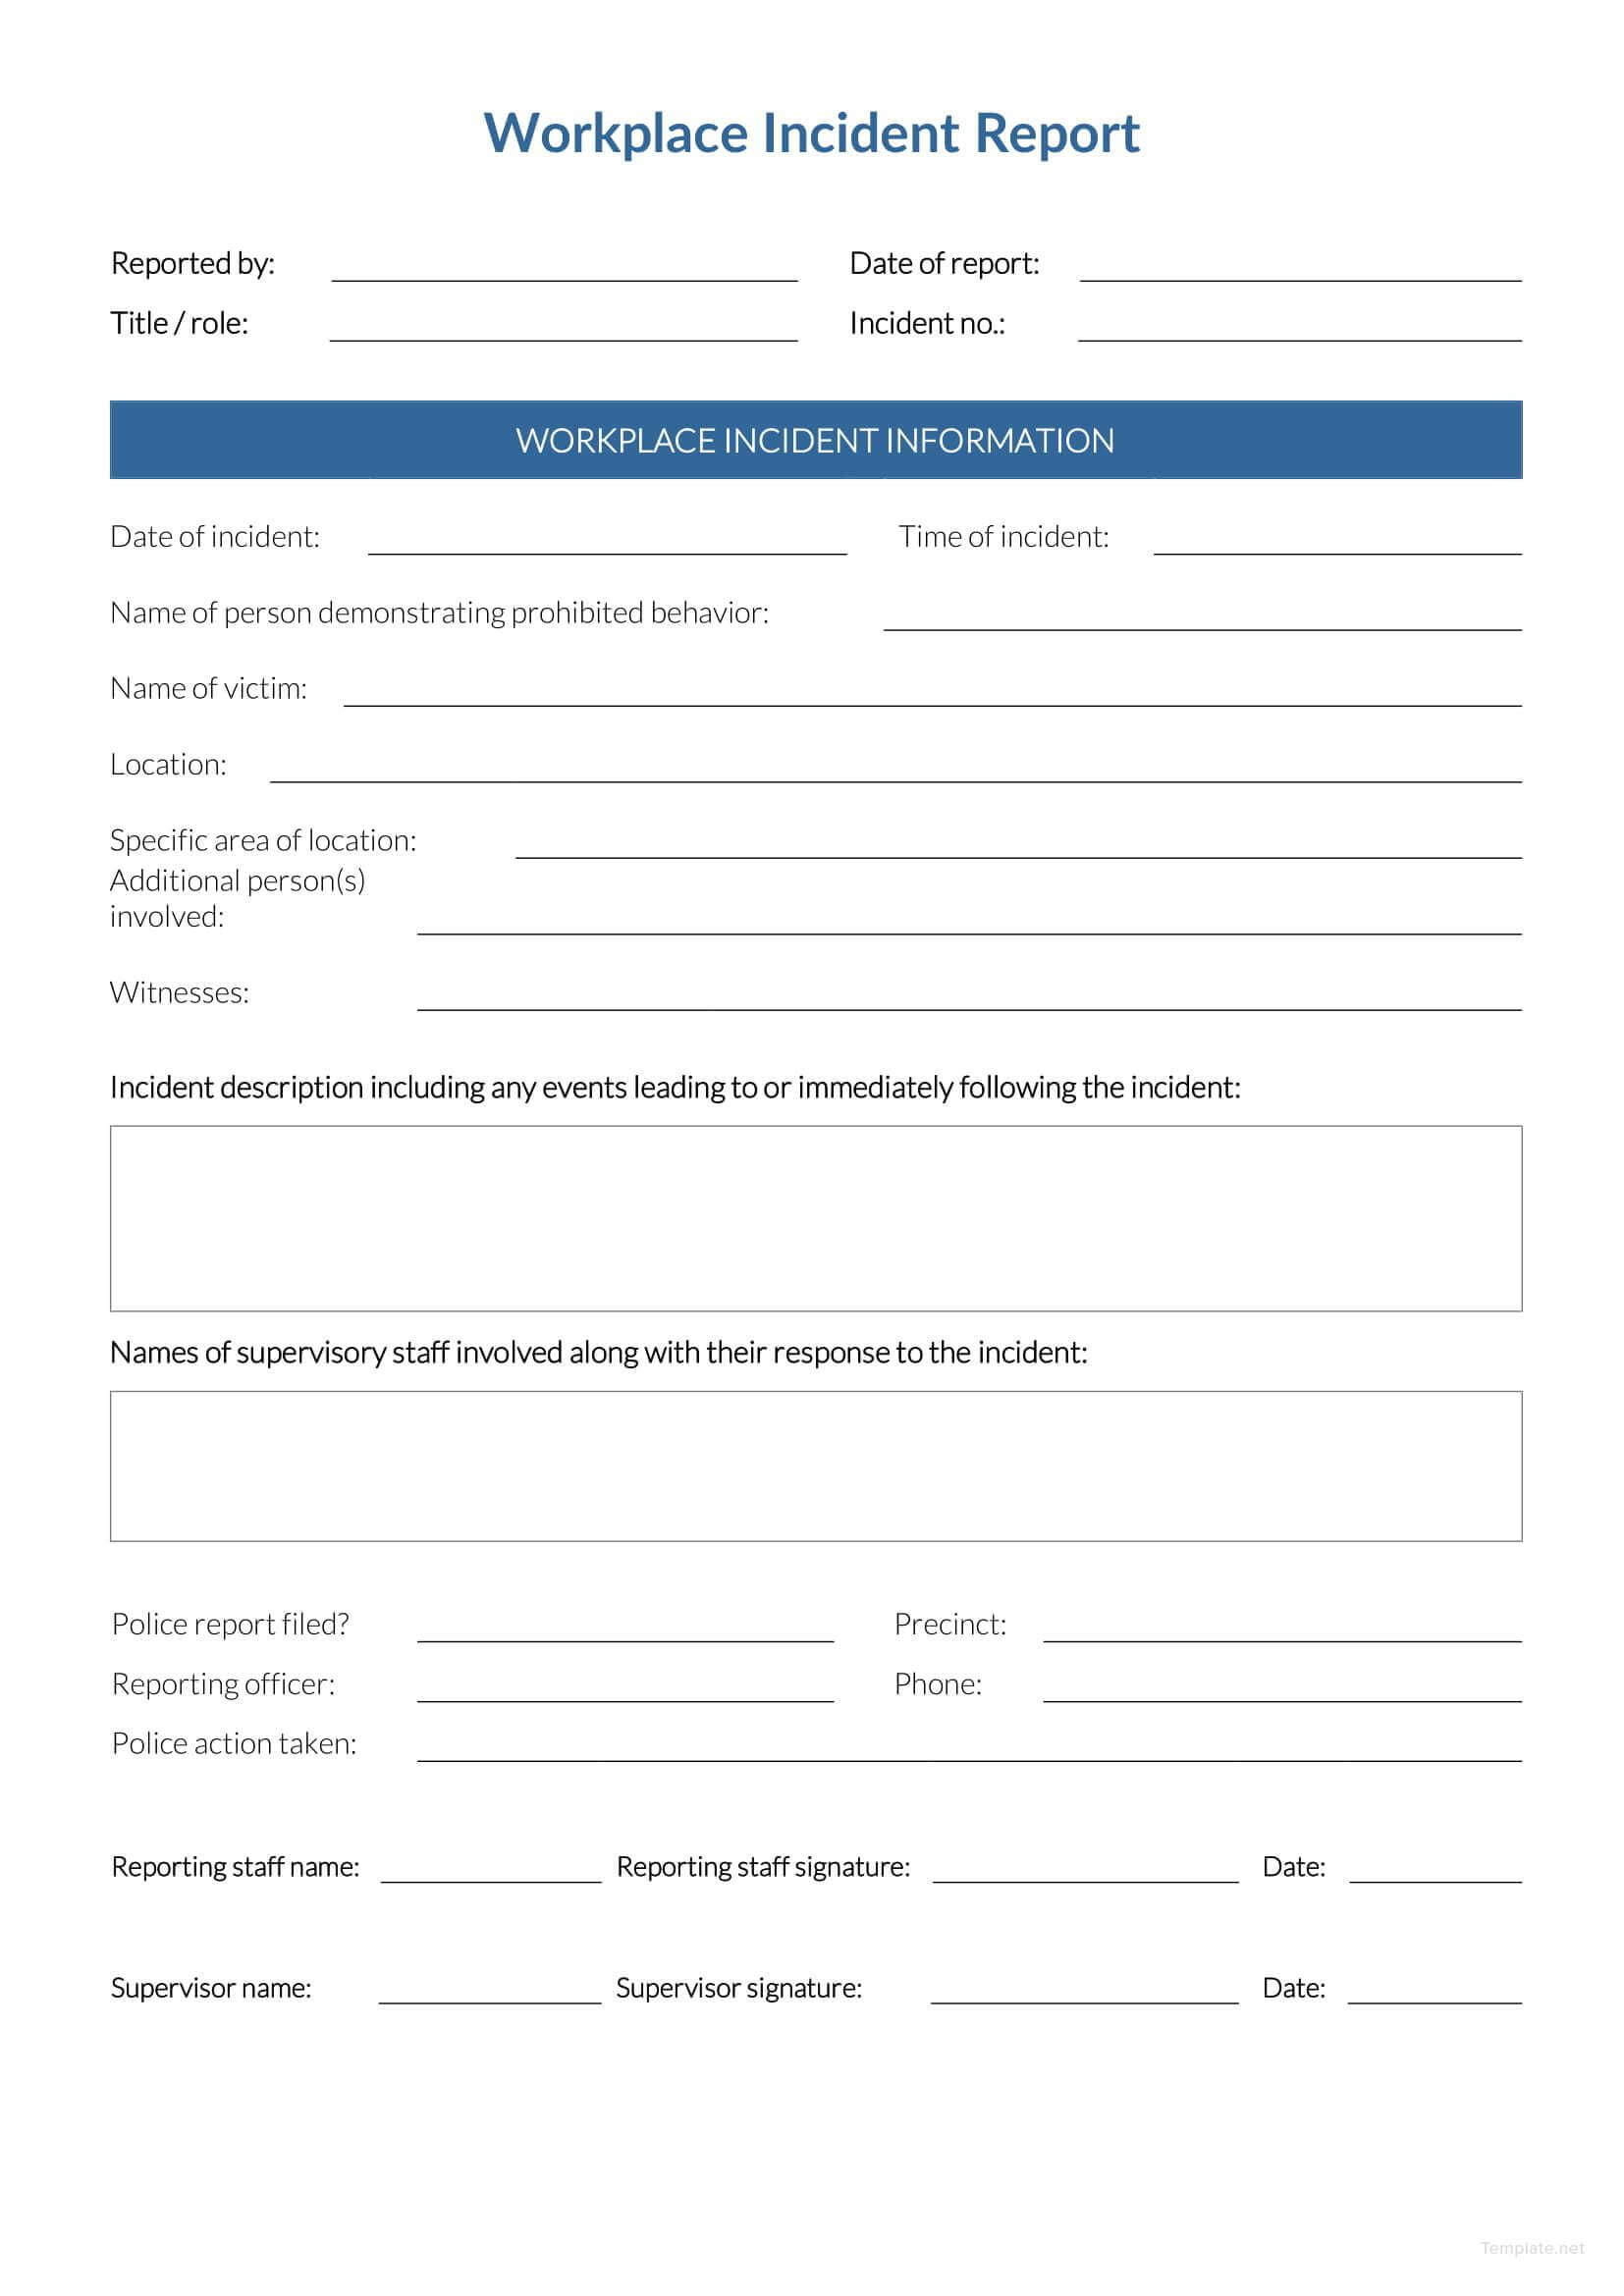 Free Workplace Incident Report | Incident Report, Report With Incident Report Register Template